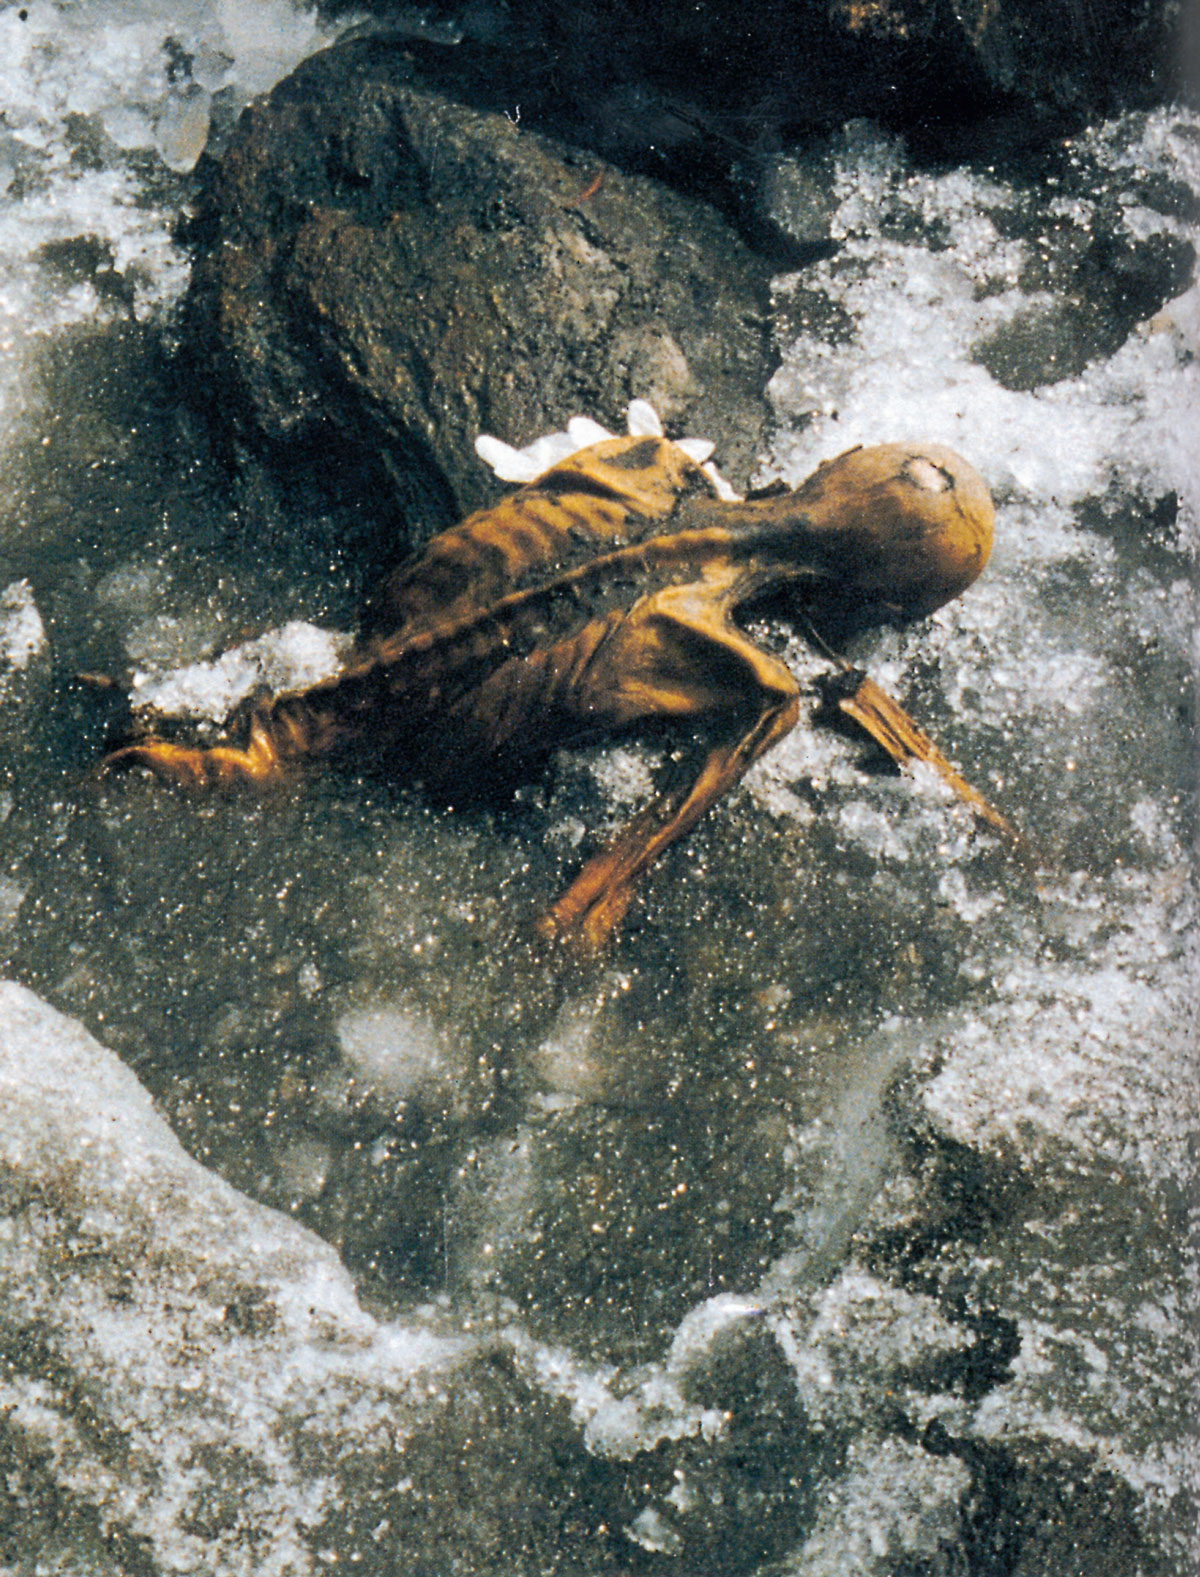 A photograph of the iceman face-down in the water after the first recovery attempt by a police officer, 20 September 1991.